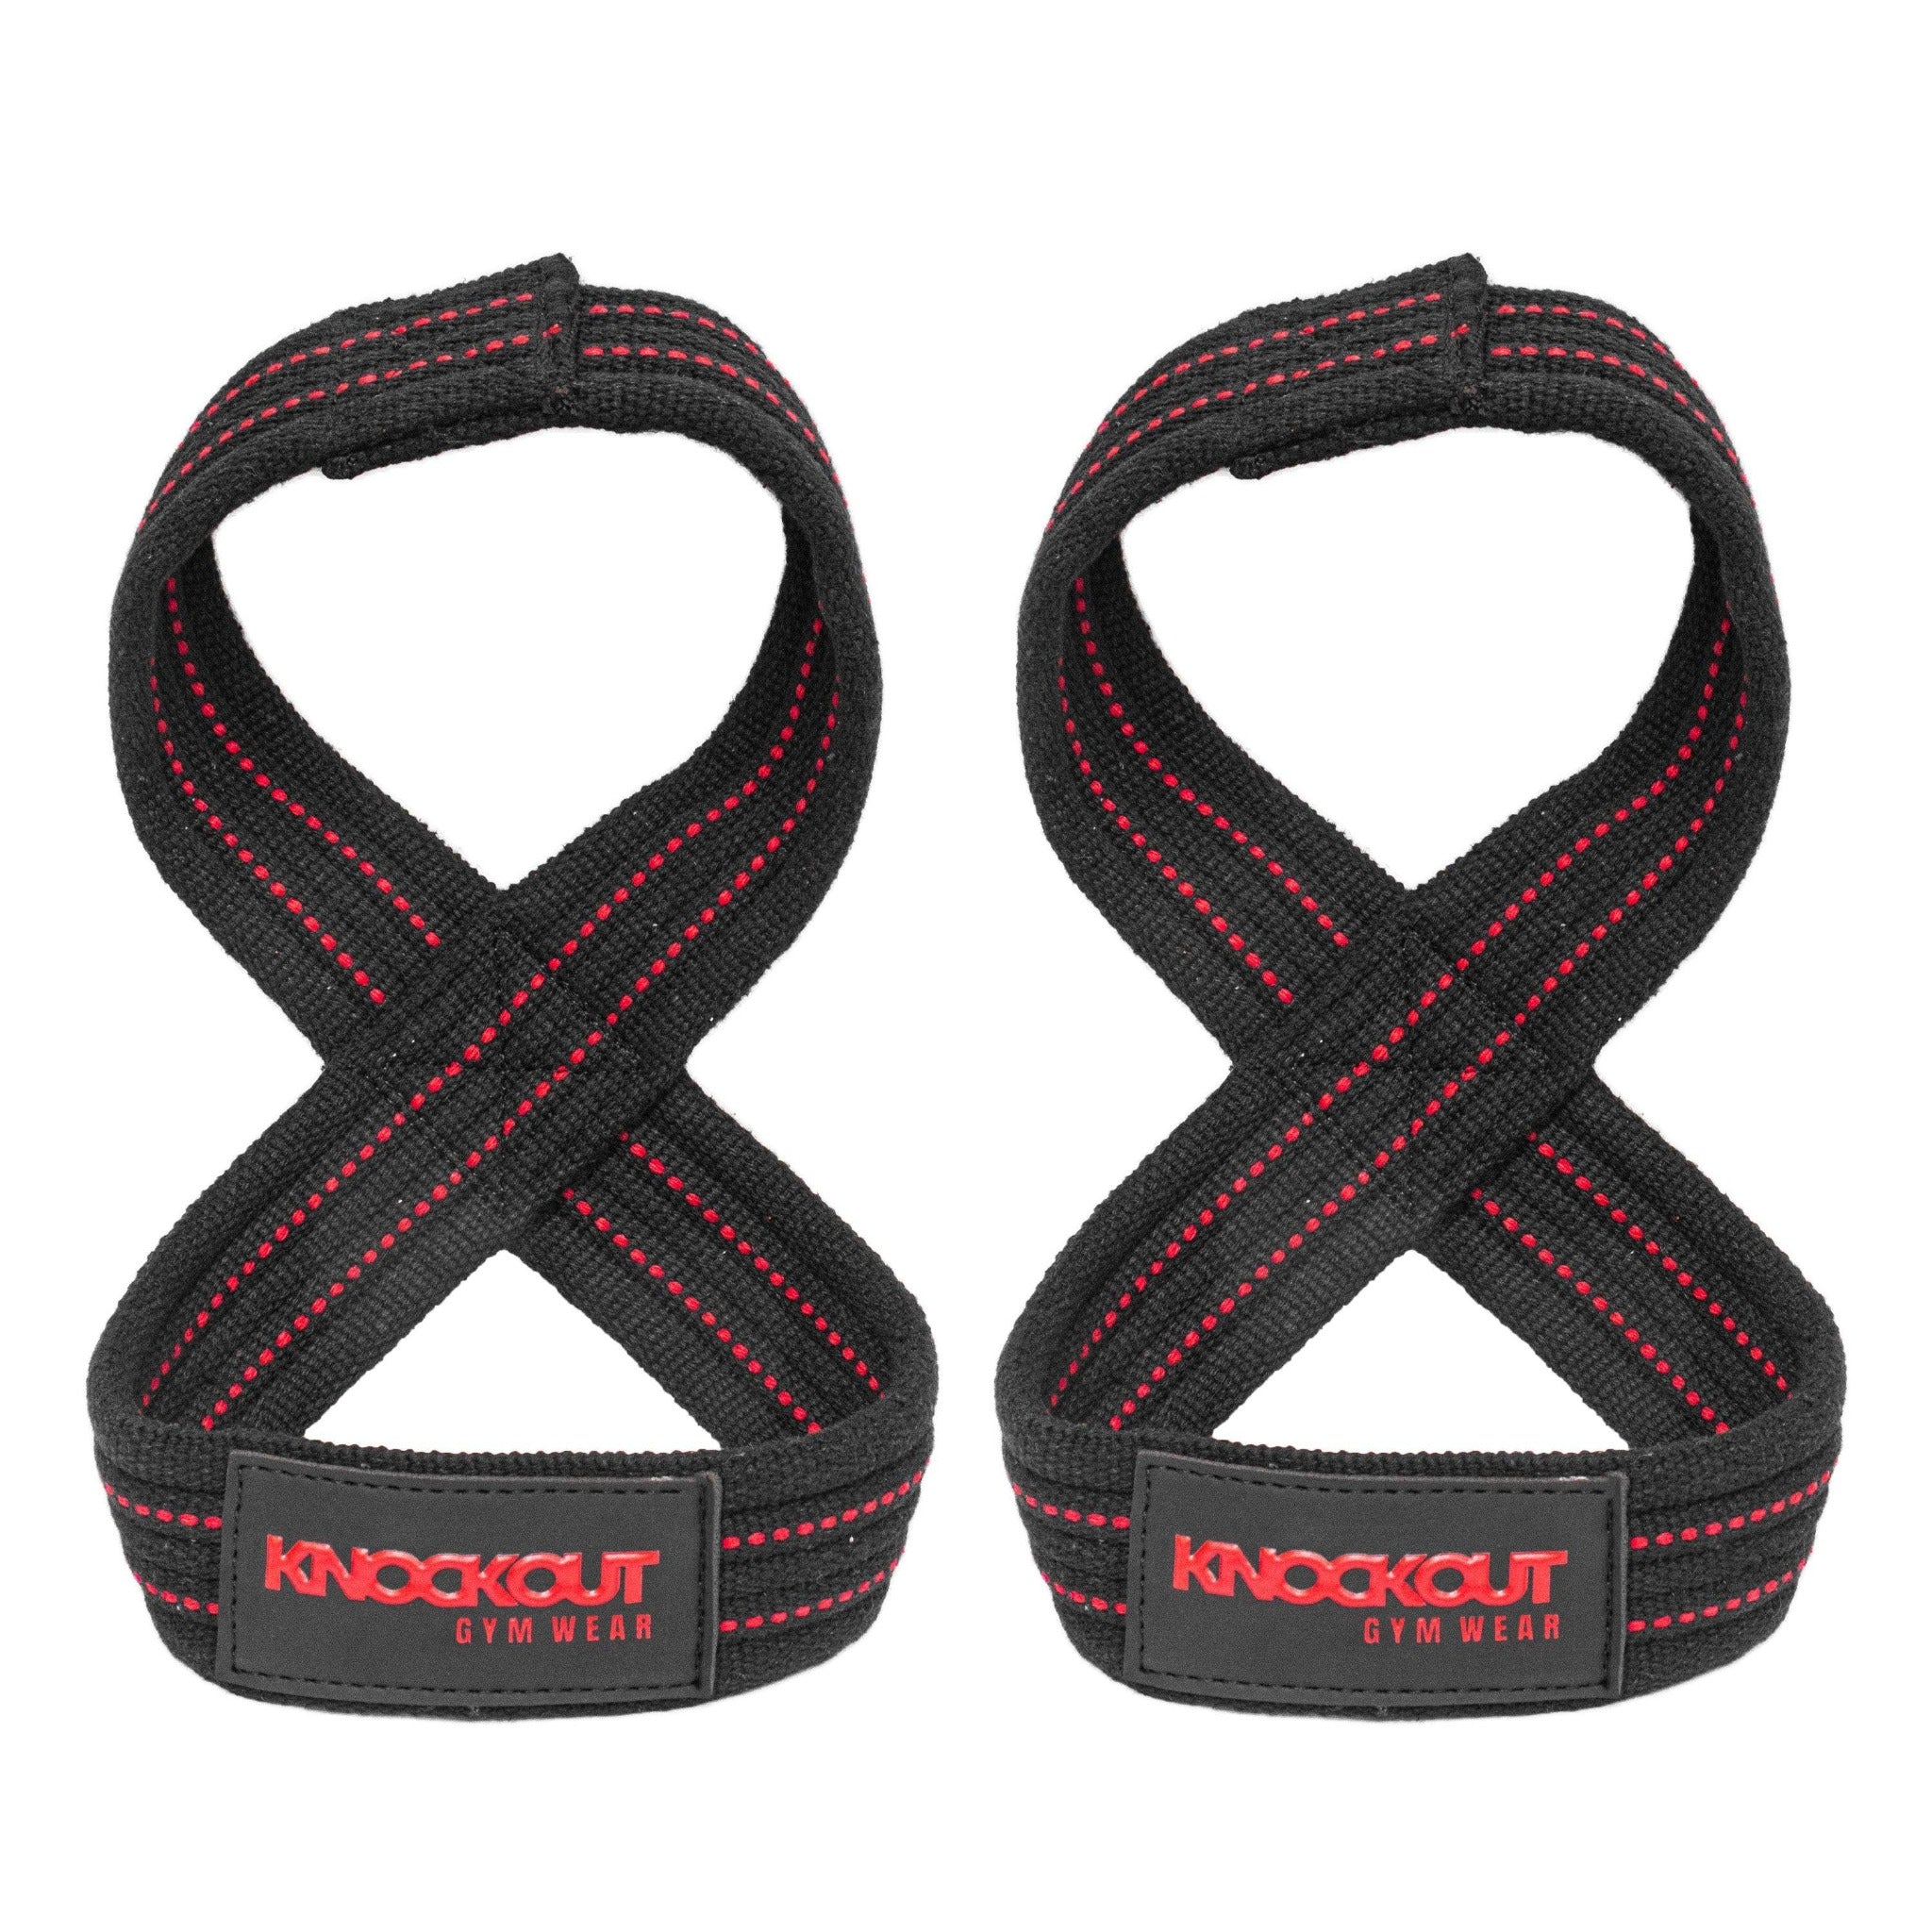 Secure your workout with our 8-Figure Woven Strap, designed for maximum durability and support. Ideal for enhancing grip and stability in your training.